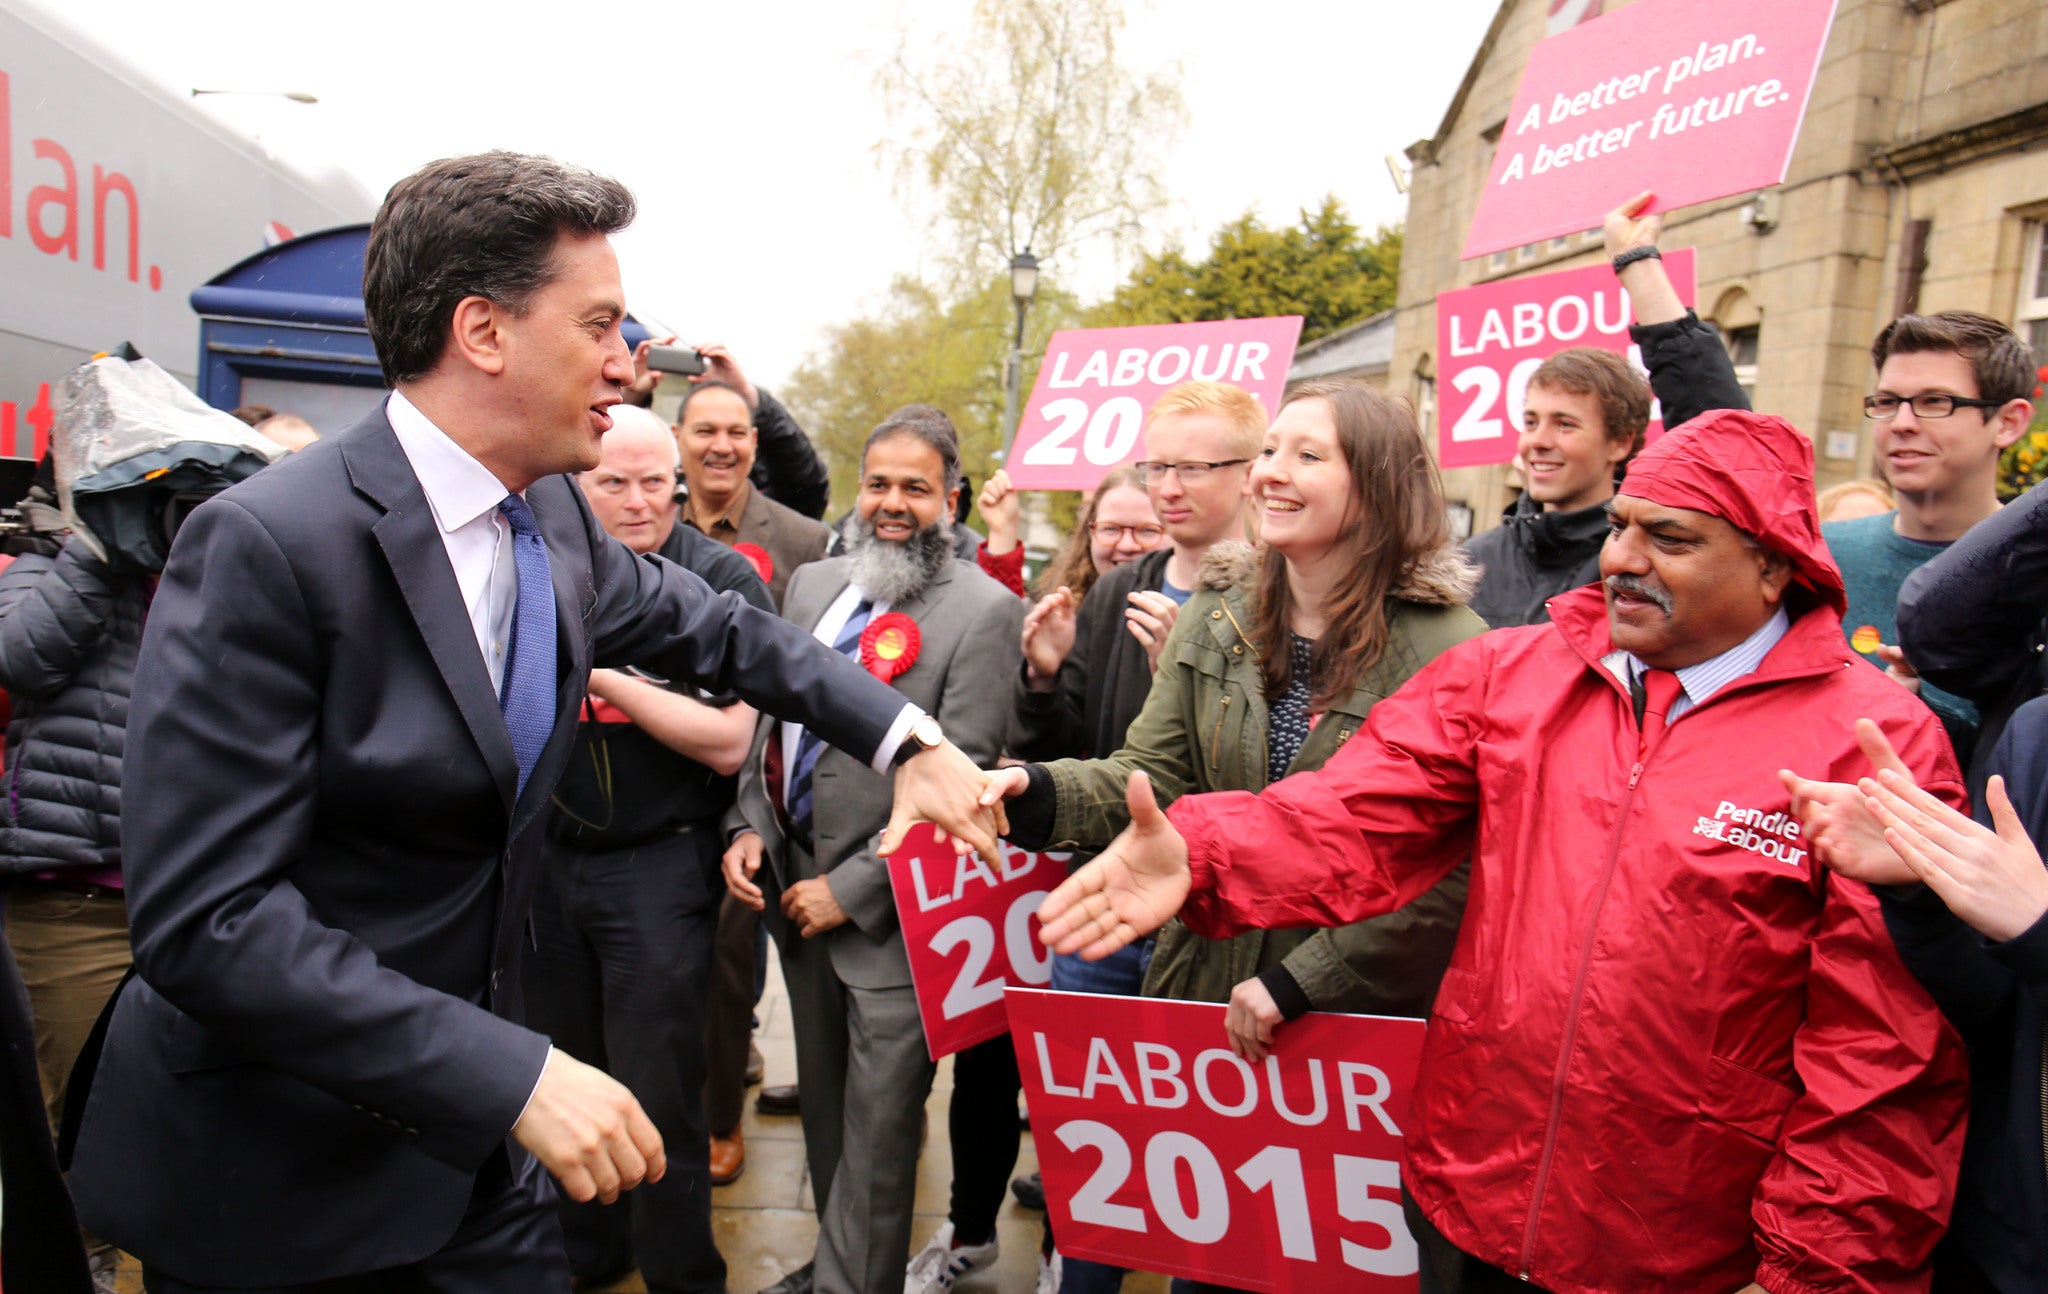 Ed Miliband campaigns in Lancashire